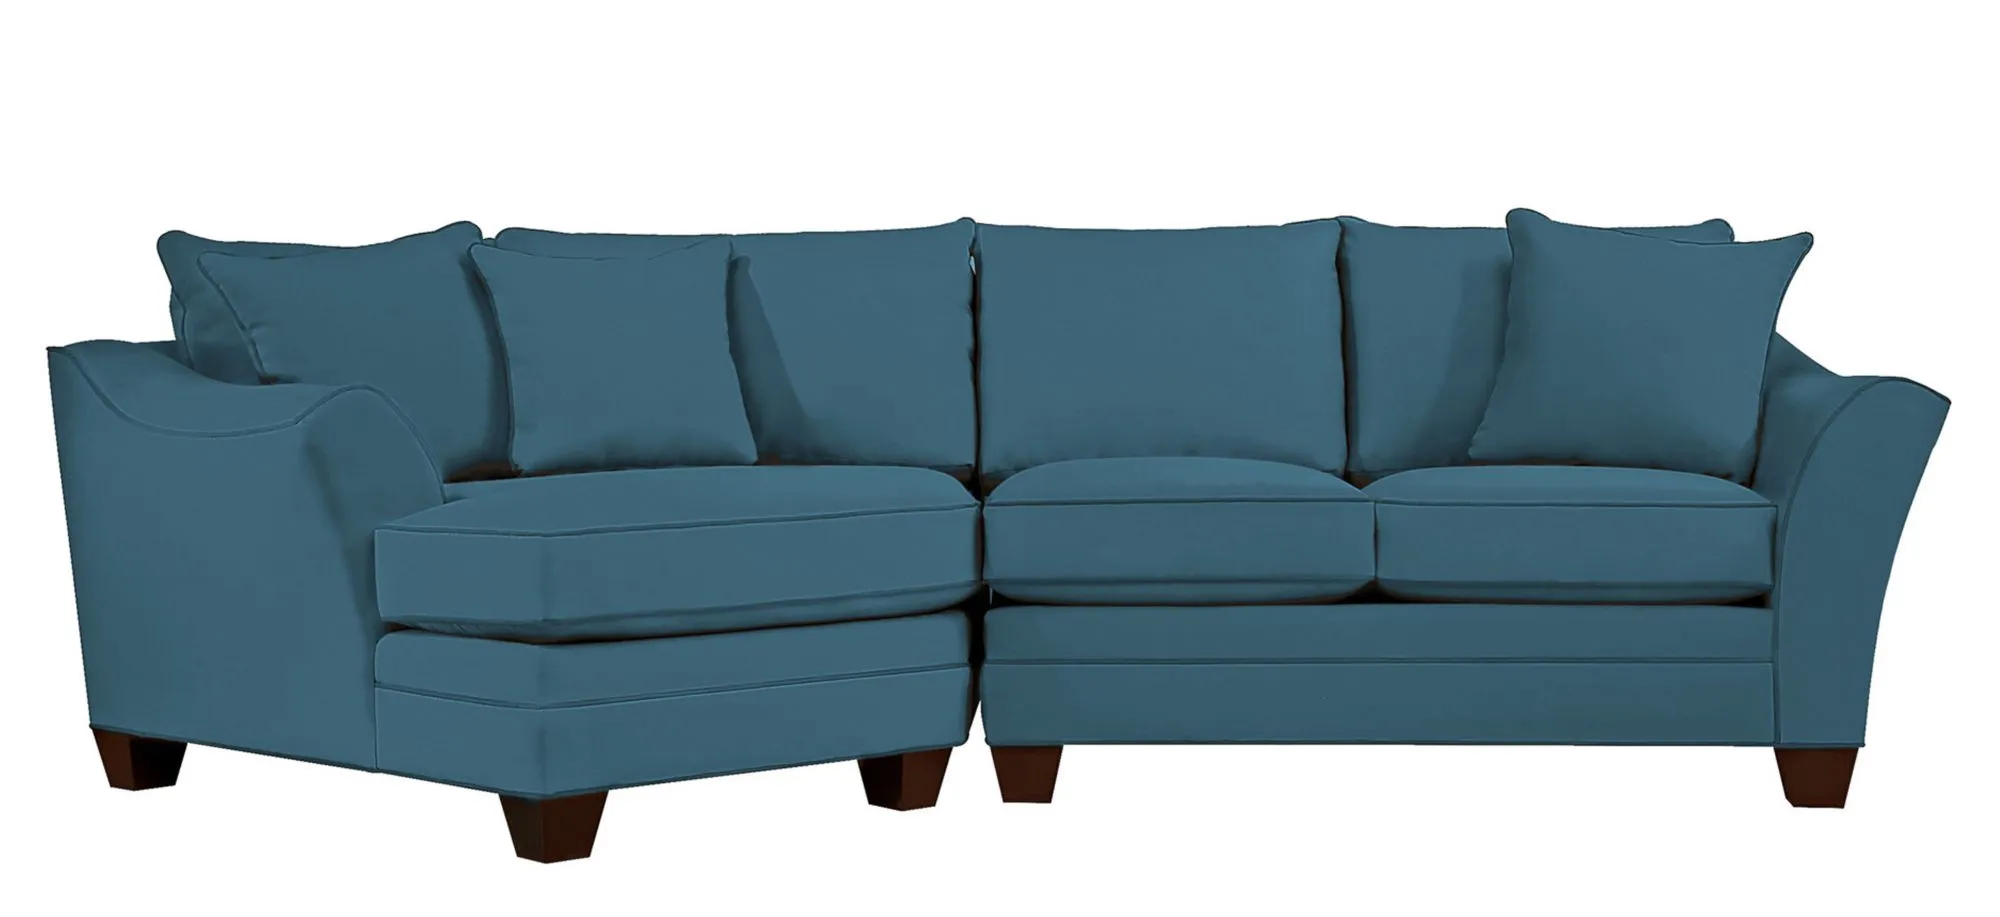 Foresthill 2-pc. Left Hand Cuddler Sectional Sofa in Suede So Soft Lagoon by H.M. Richards